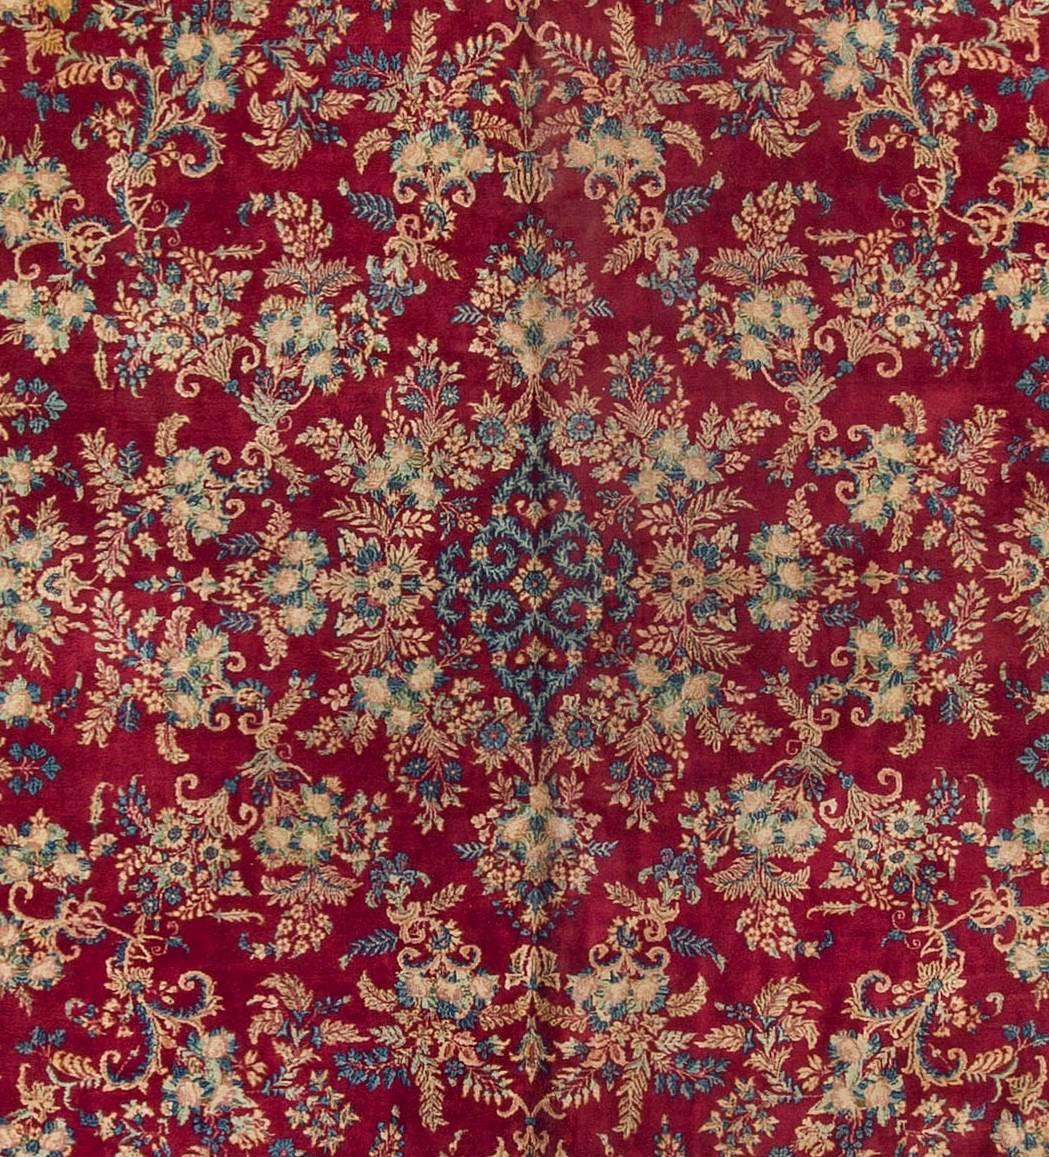 This rug is a striking piece of an unusual size. The field and border filled with floral motifs and creating a strong visual impression, that will translate in a room to create a truly wonderful look. Kirman is the capital of the province in south